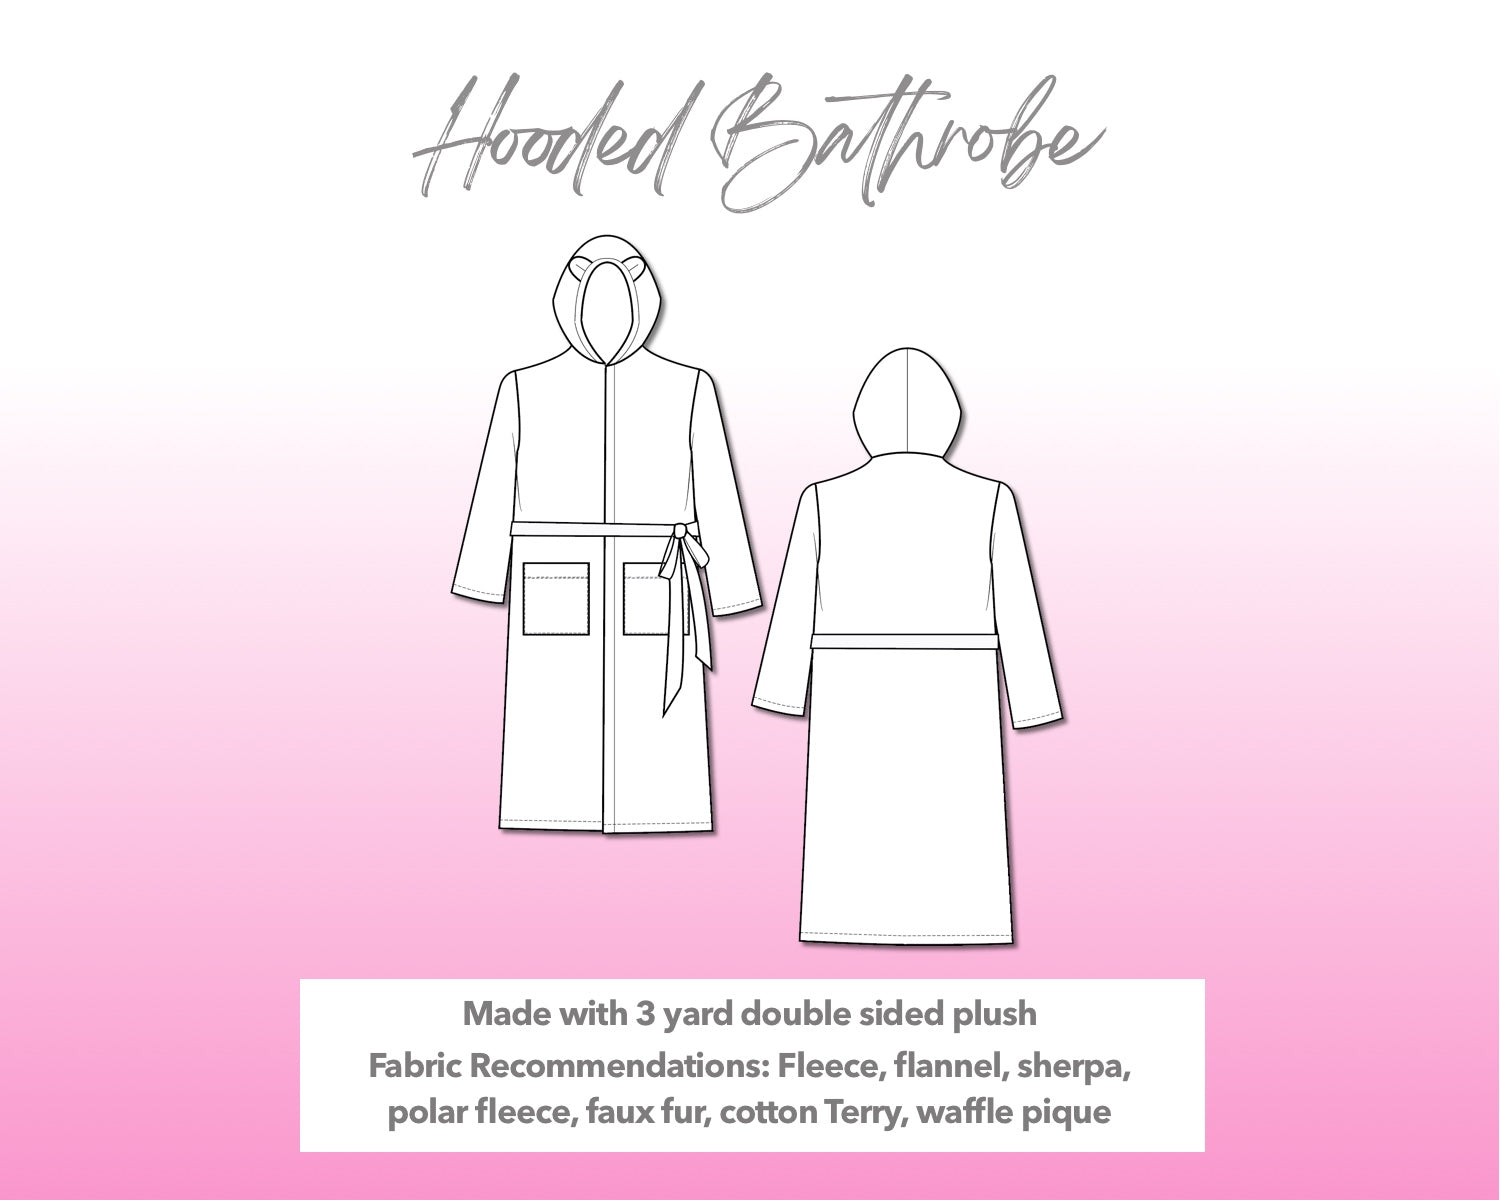 Illustration and detailed description for Hooded Bathrobe sewing pattern.